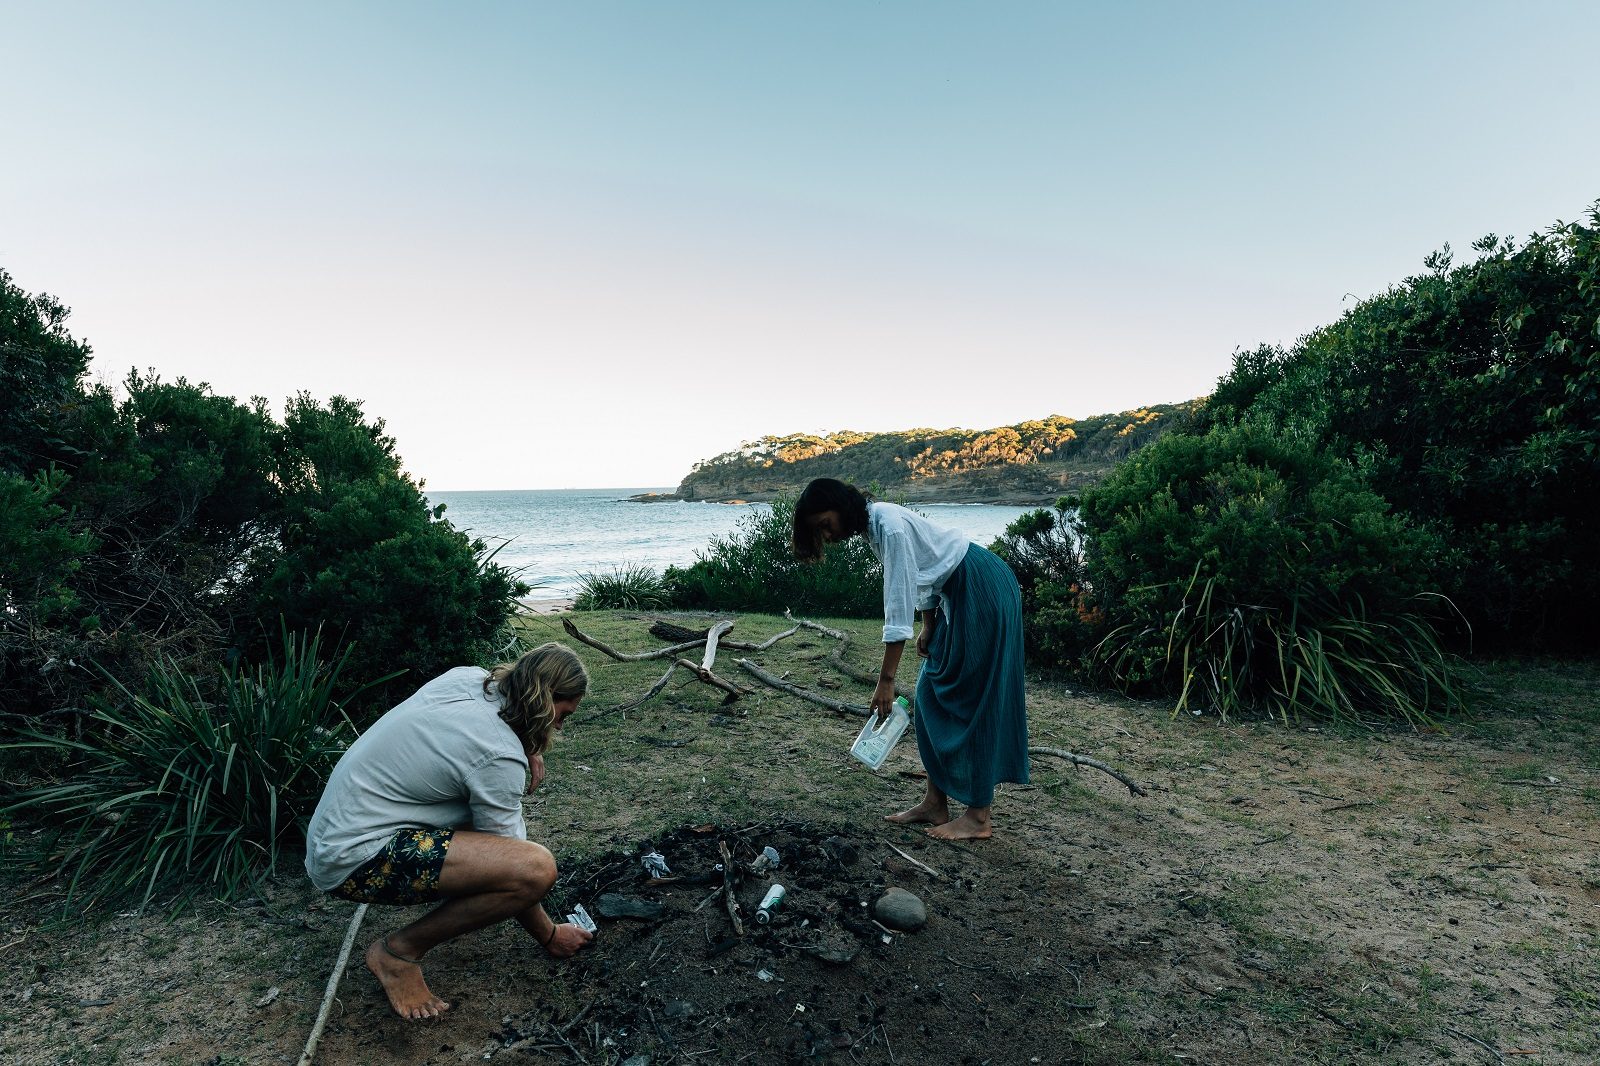 People cleaning up rubbish at Emily Miller Beach in Murramarang National Park. Photo credit: Melissa Findley/DPIE